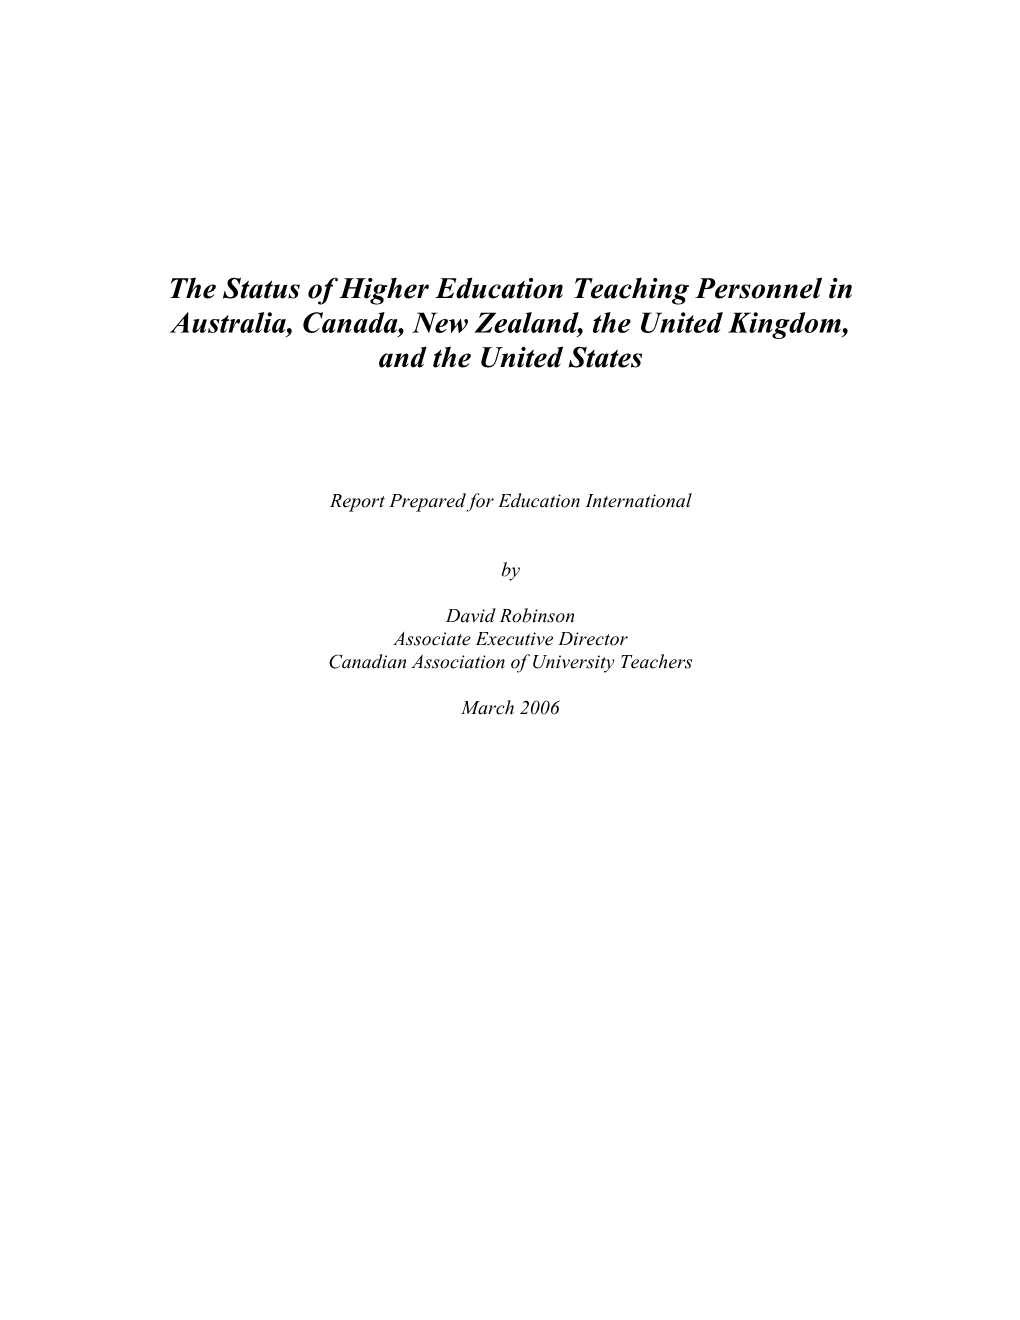 The Status of Higher Education Teaching Personnel in Australia, Canada, New Zealand, the United Kingdom, and the United States